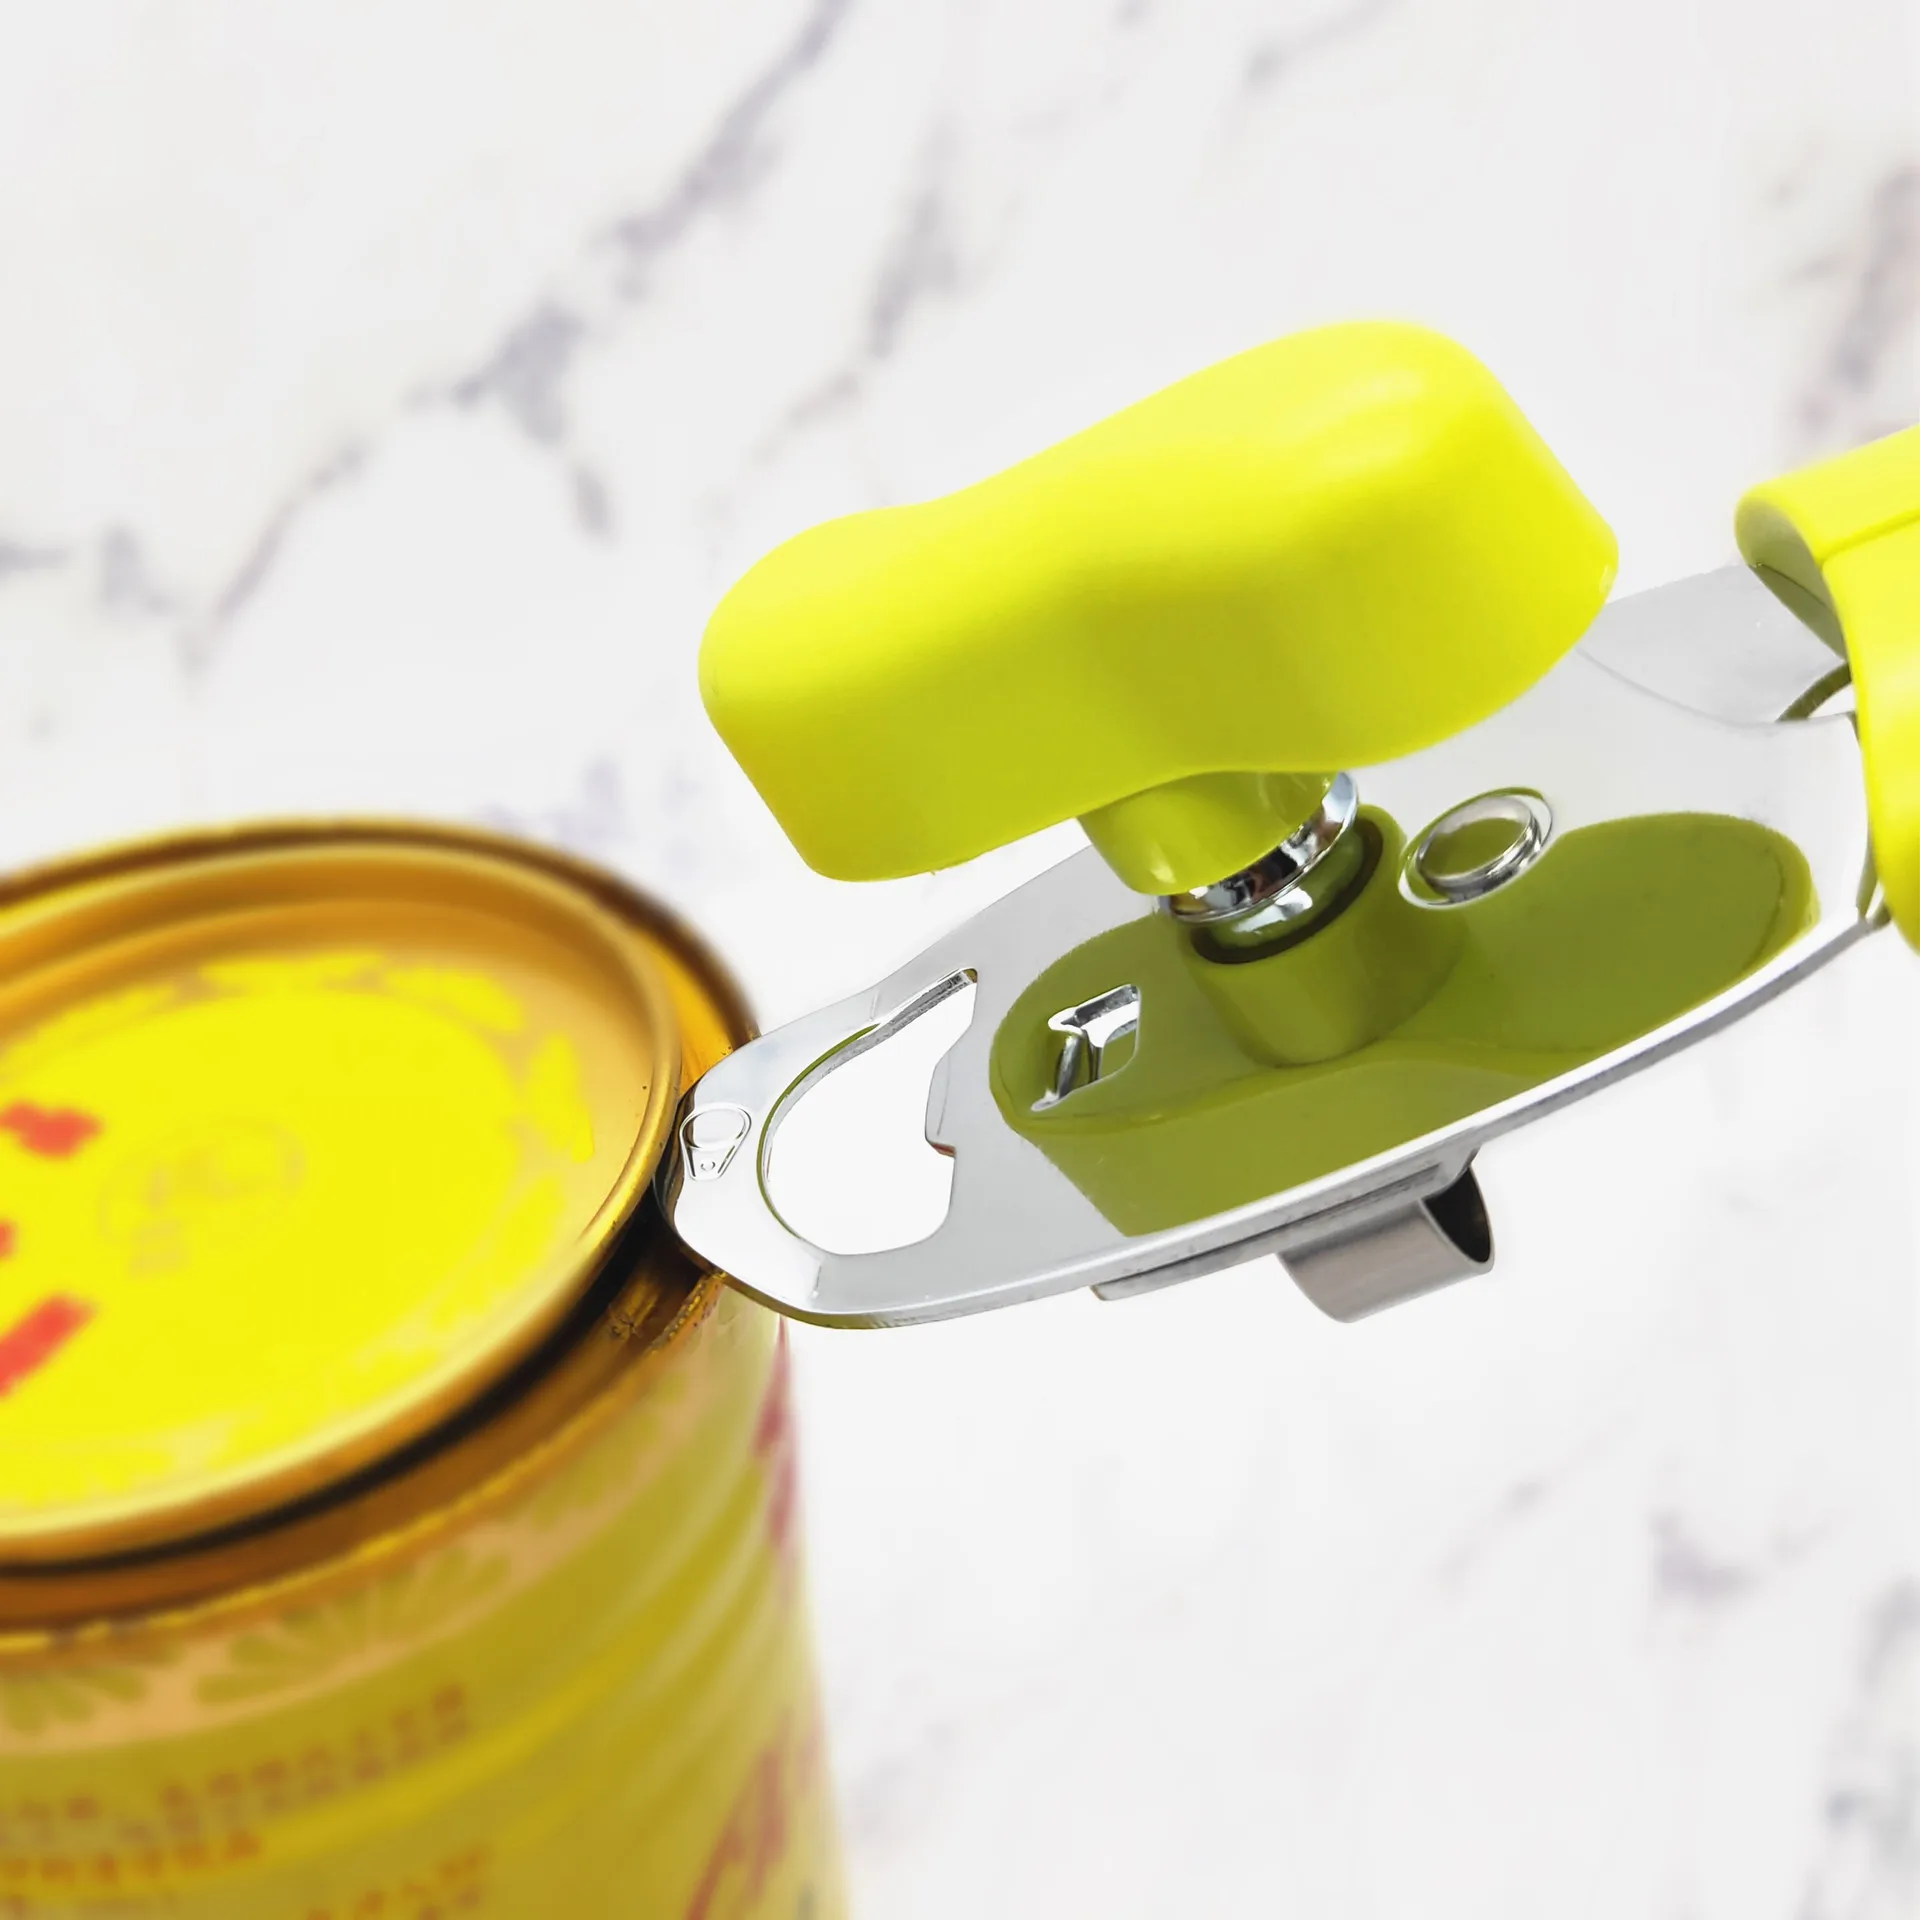 Amazon Top 2019 New Daily Gadgets Products Supply Durable Safe Manual Can Opener Manual Tool Multi-function Bottle Can Opener